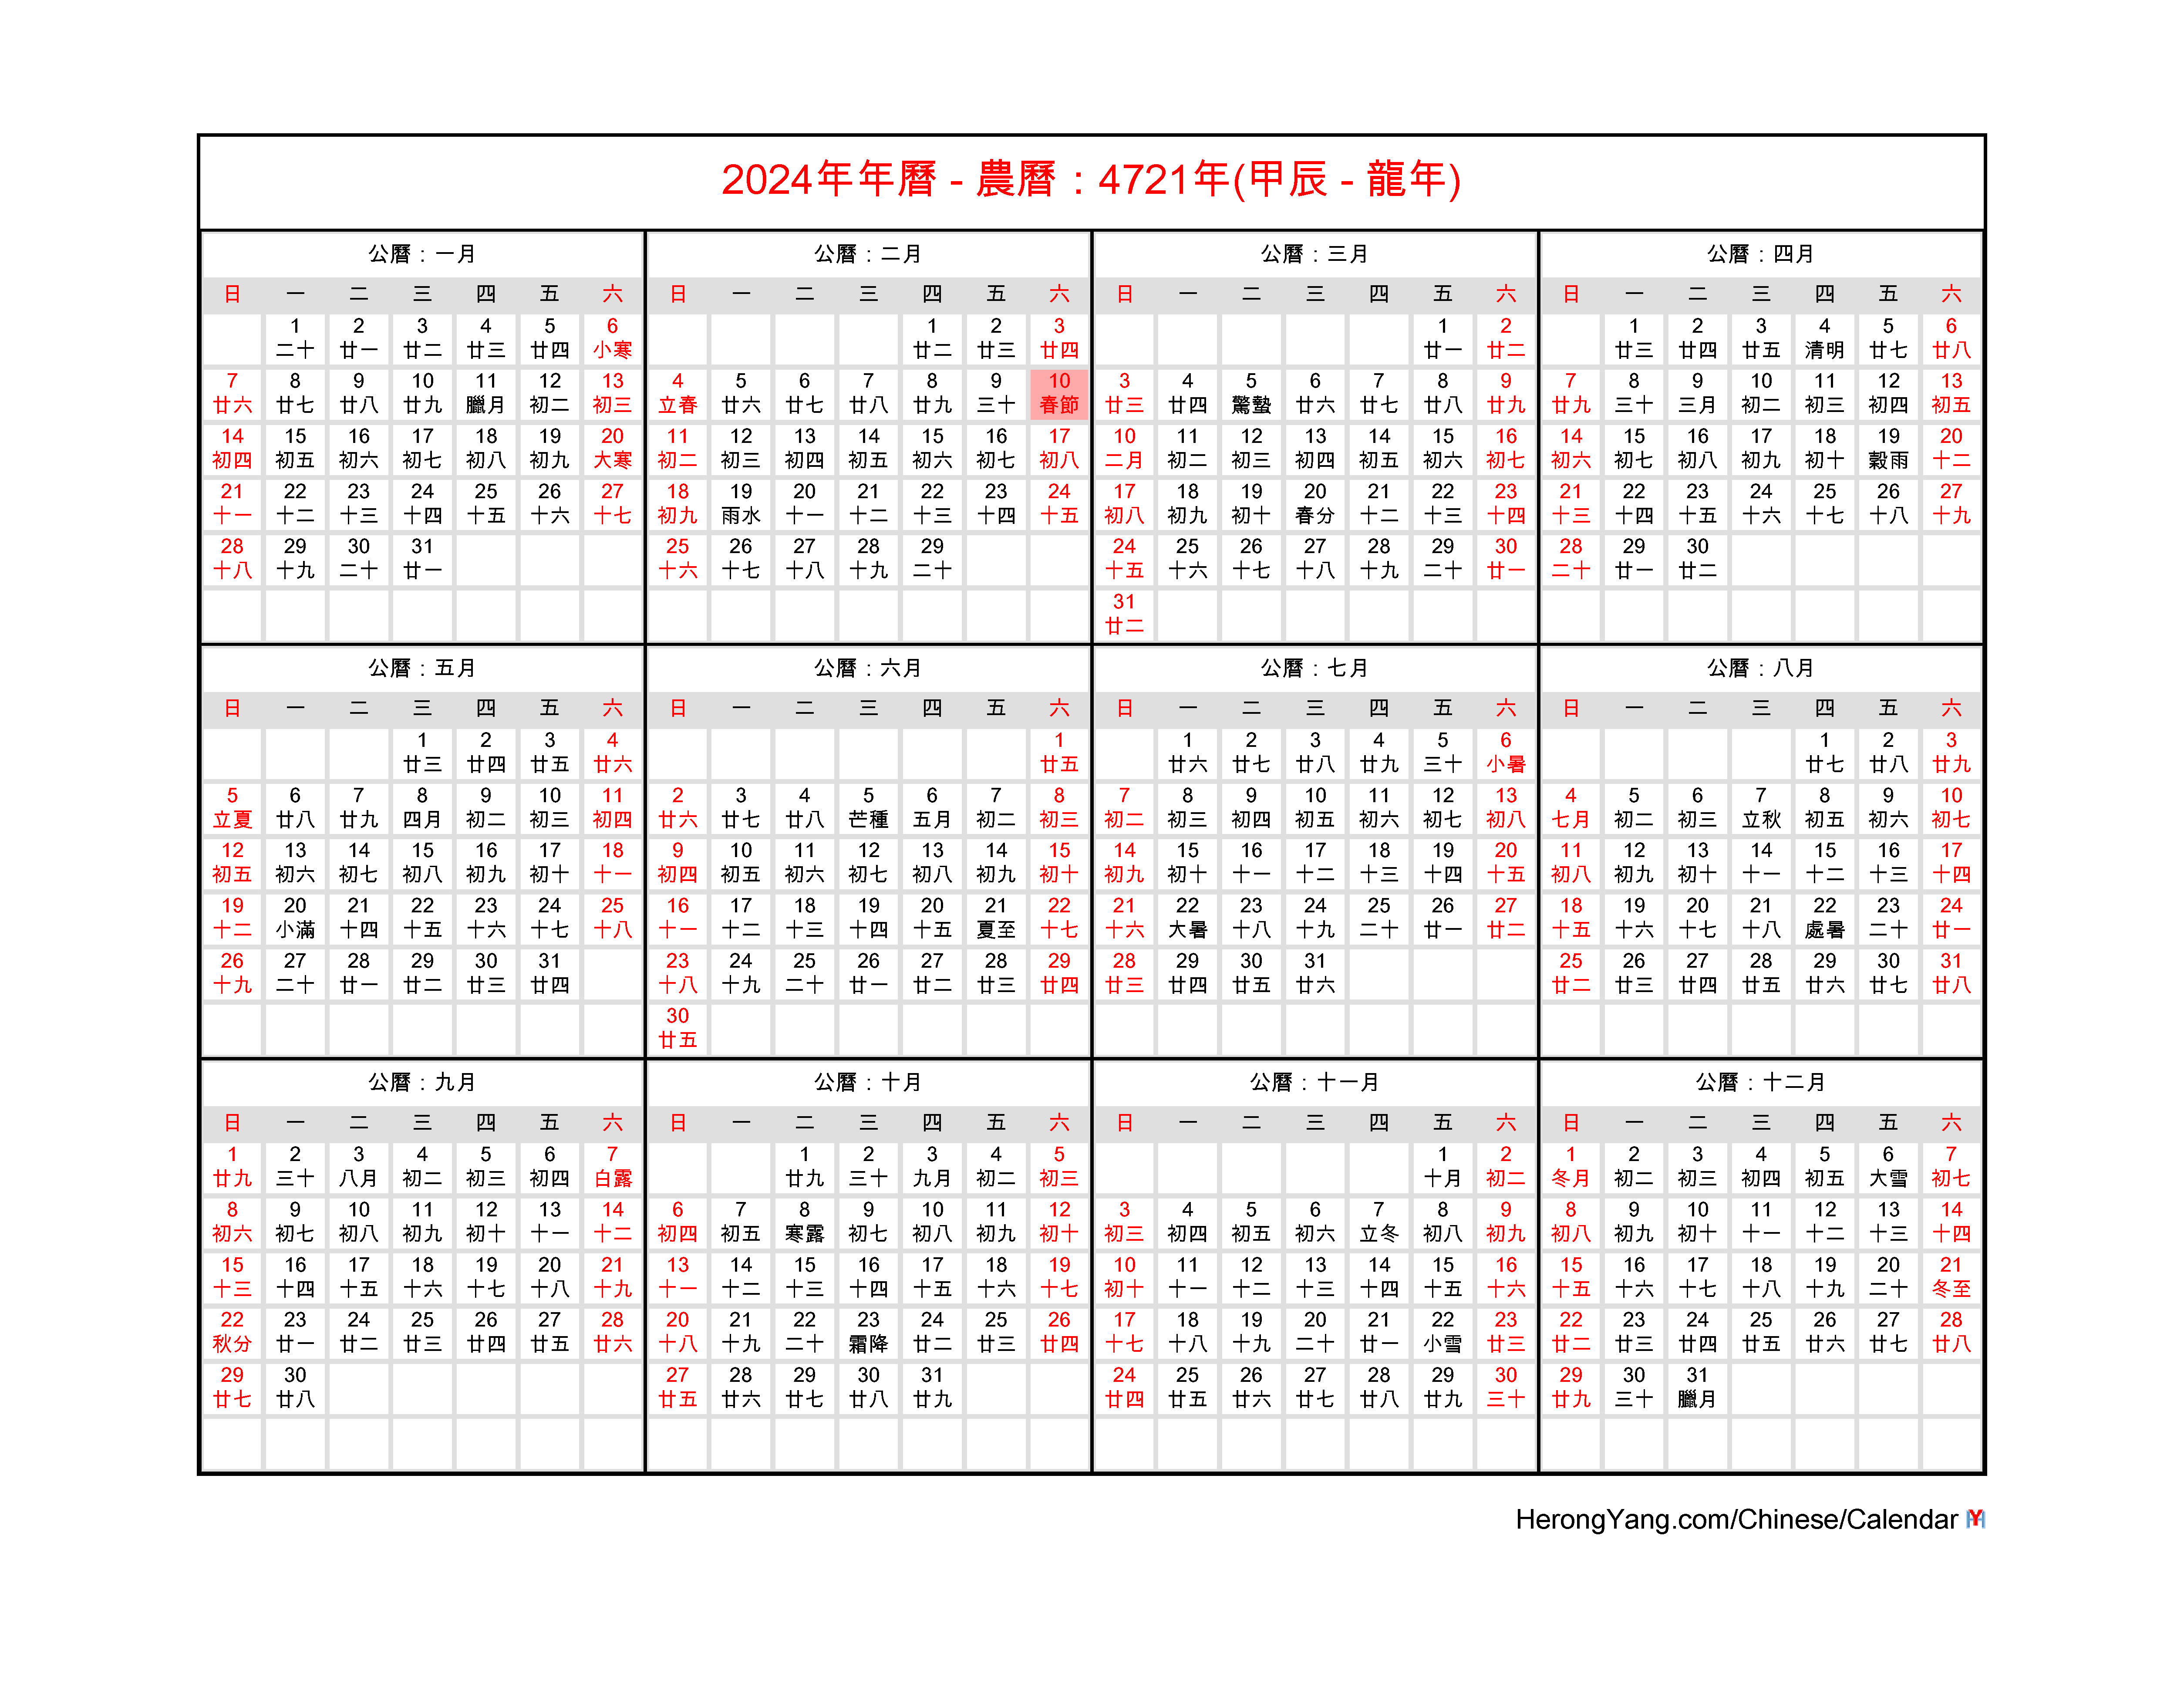 Chinese New Year Vacation Dates 2024 gayle joanna